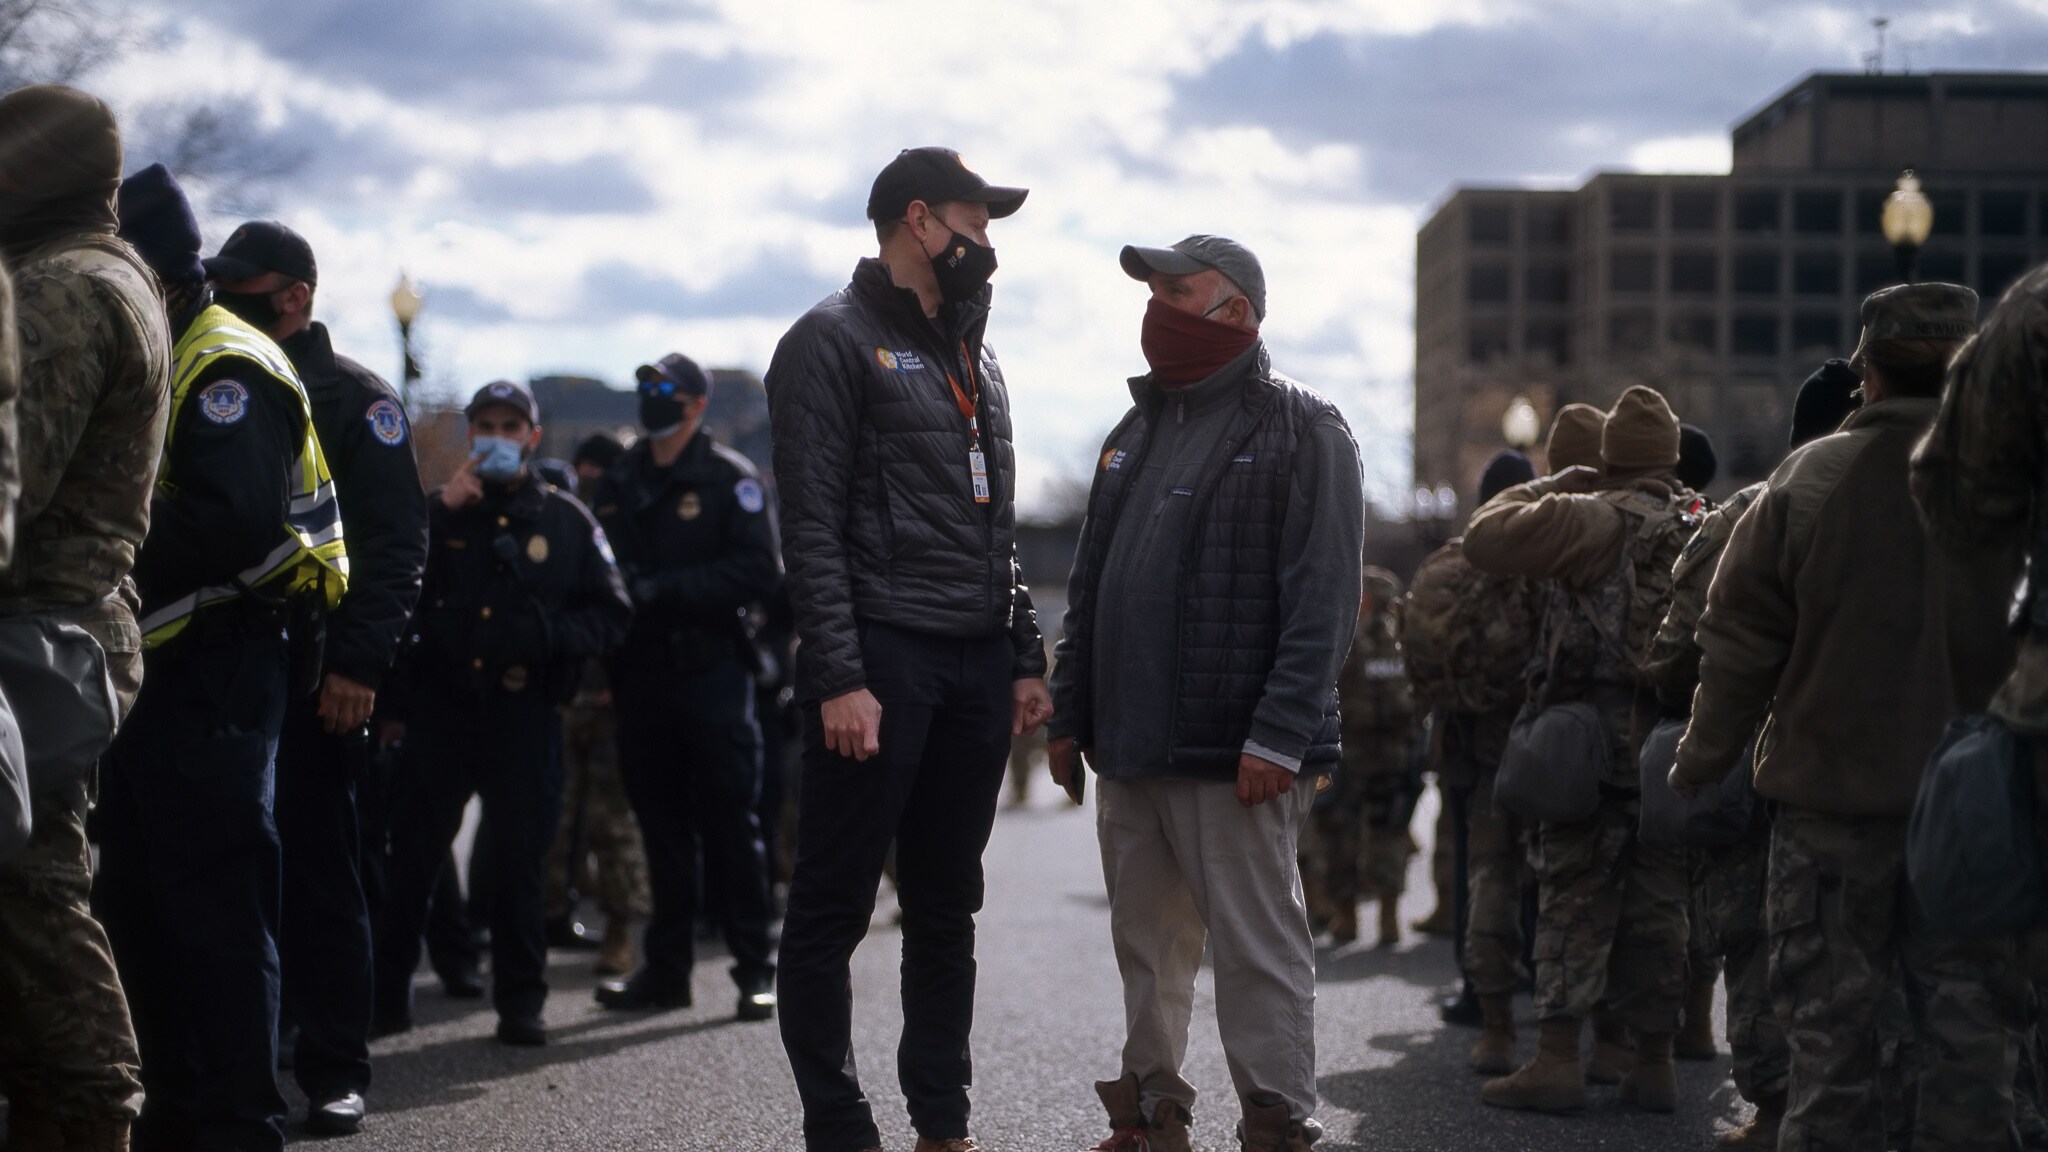 José Andrés (center right) and World Central Kitchen CEO, Nate Mook (center left), have a conversation while surrounded by National Guard units stationed at the US Capitol for the presidential election. (Credit: National Geographic/Dylan Dugas)